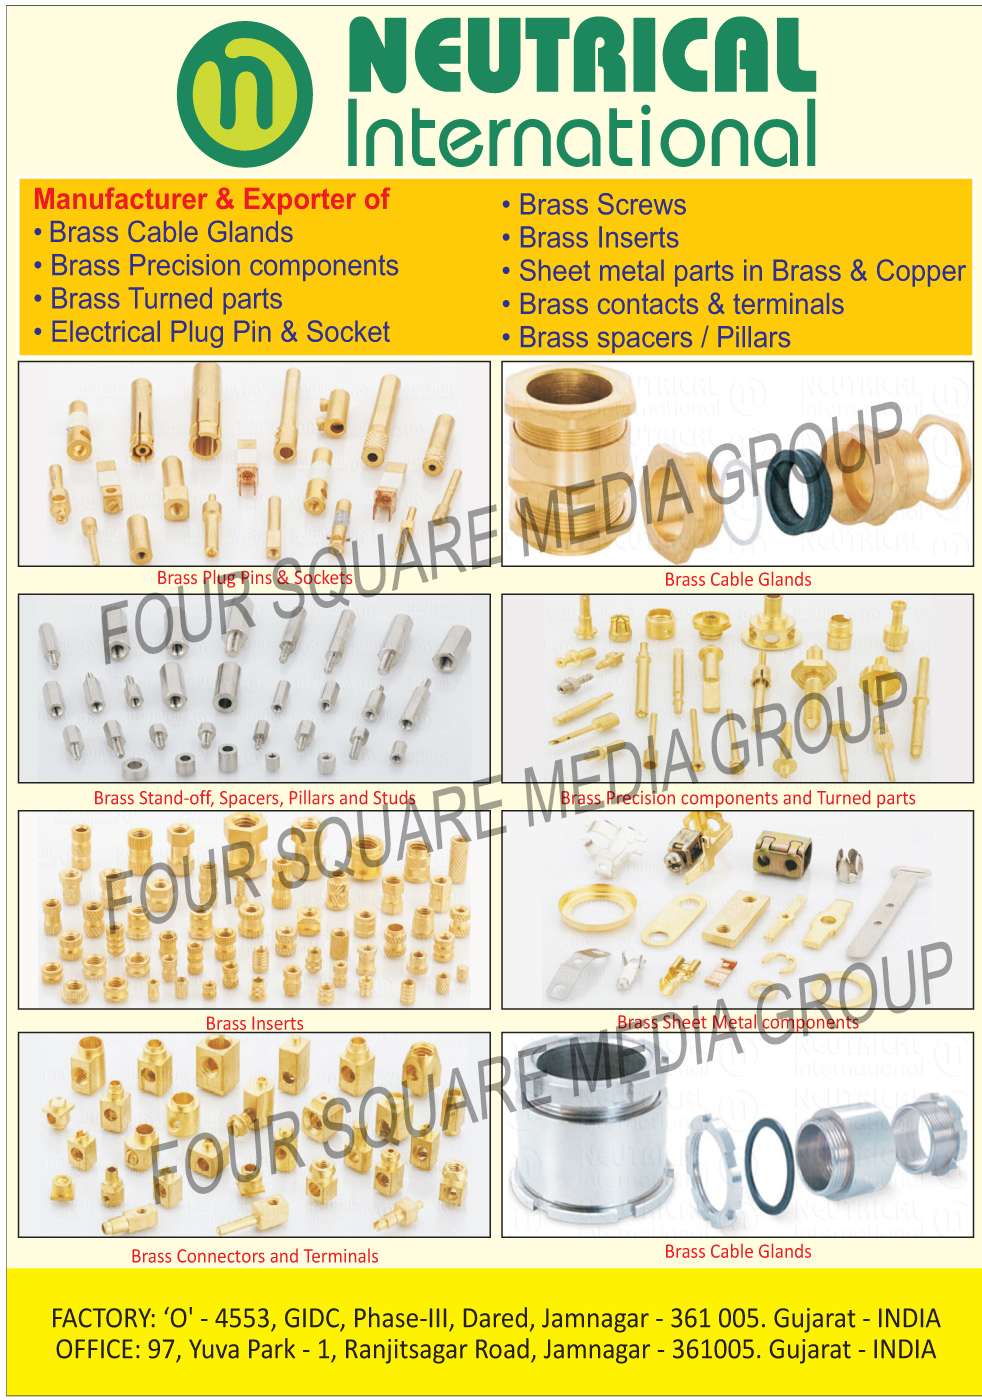 Brass Cable Glands, Brass Precision Components, Brass Turned Parts, Electrical Plug Pins, Electrical Plug Sockets, Brass Screws, Brass Inserts, Brass Sheet Metal Parts, Copper Sheet Metal Parts, Brass Components, Brass Terminals, Brass Spacers, Brass Pillars, Brass Stand Off, Brass Studs, Brass Connectors